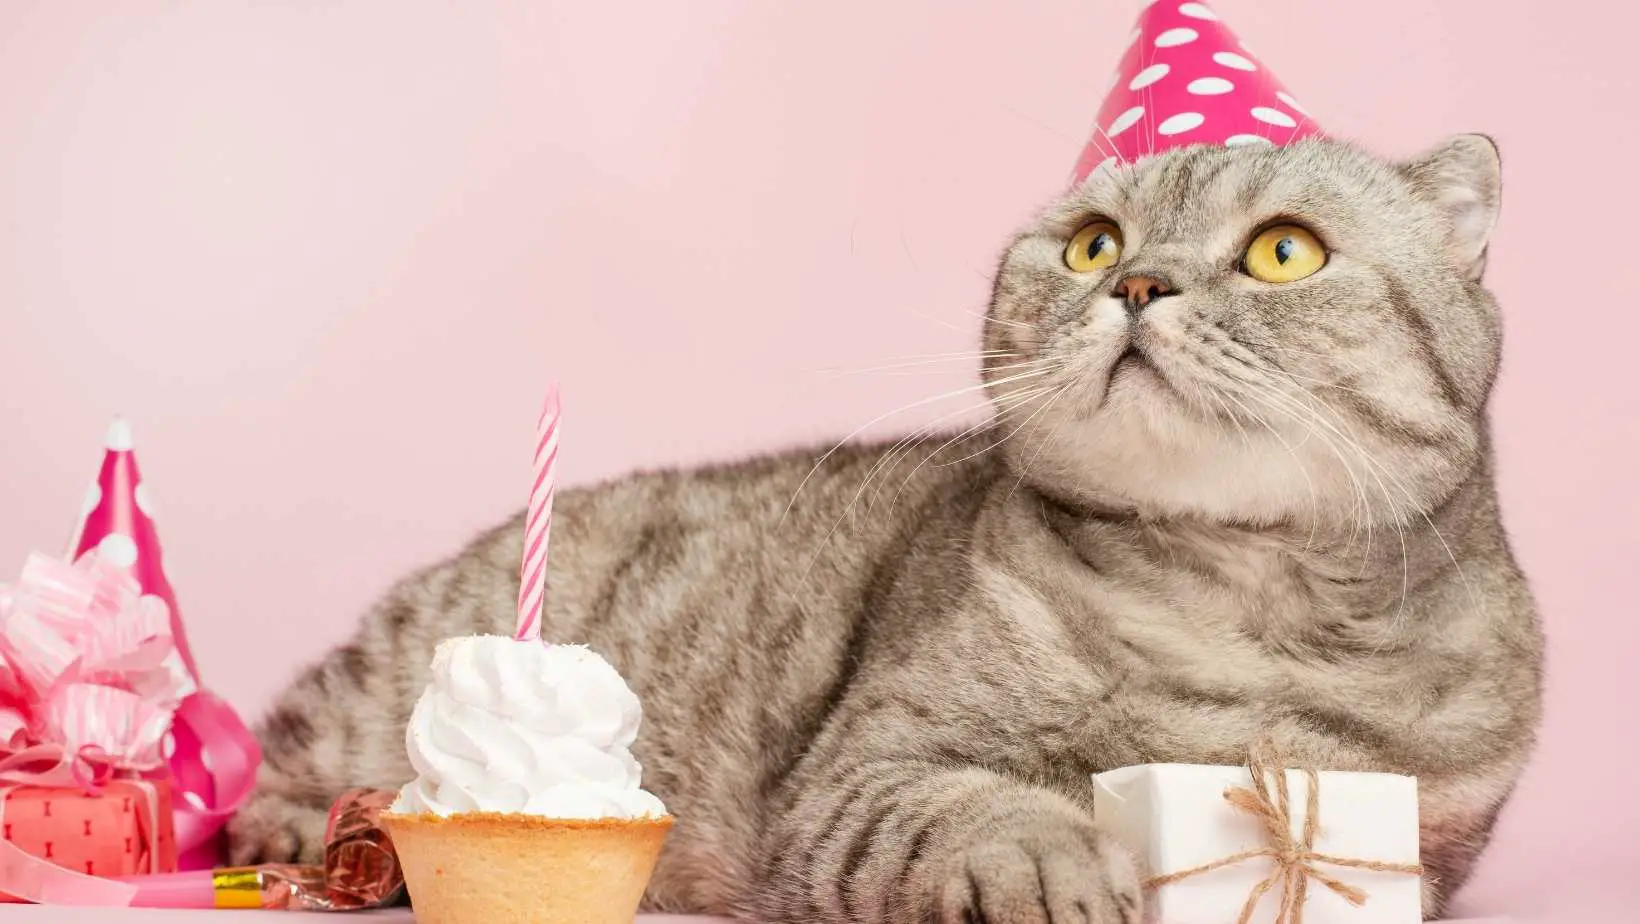 How to Celebrate the Birthday of Your Cat?